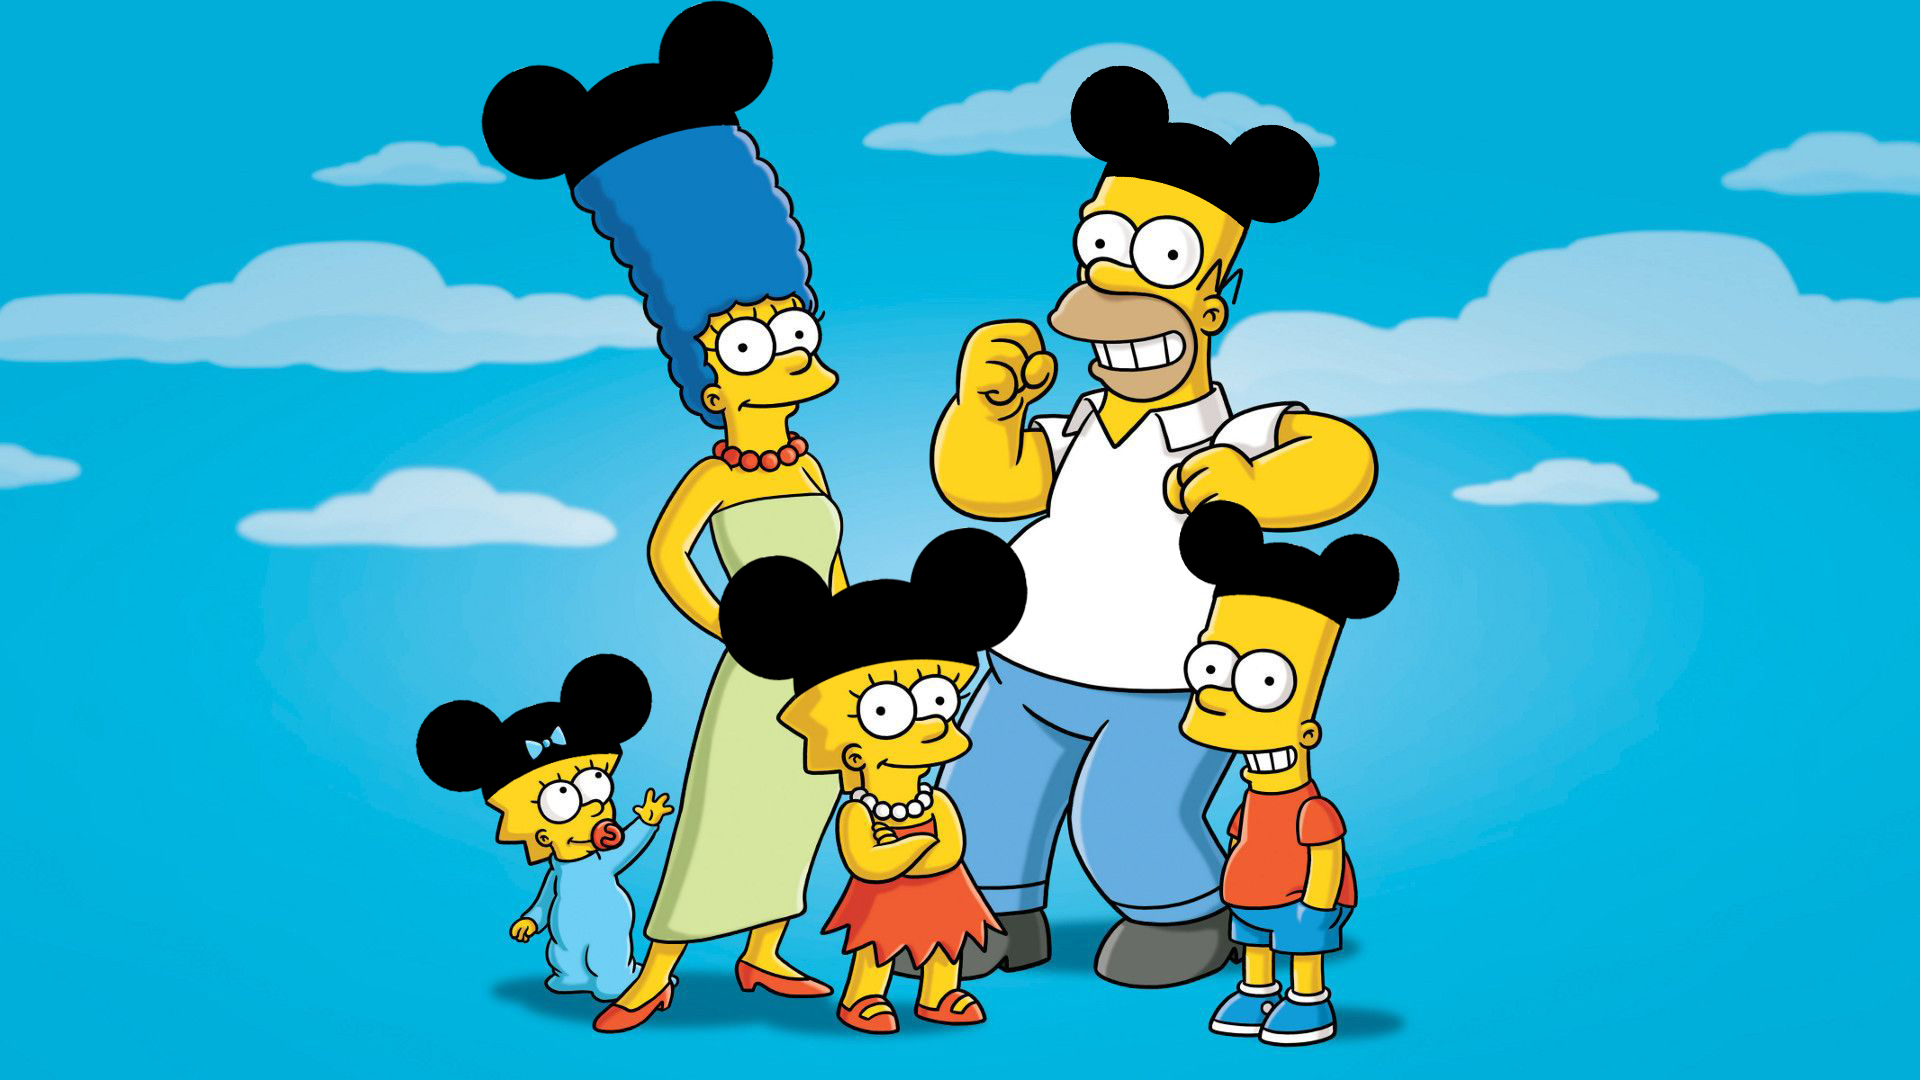 the_simpsons_with_mickey_mouse_s_ears_by_arthony70100-dbtcg0a.jpg